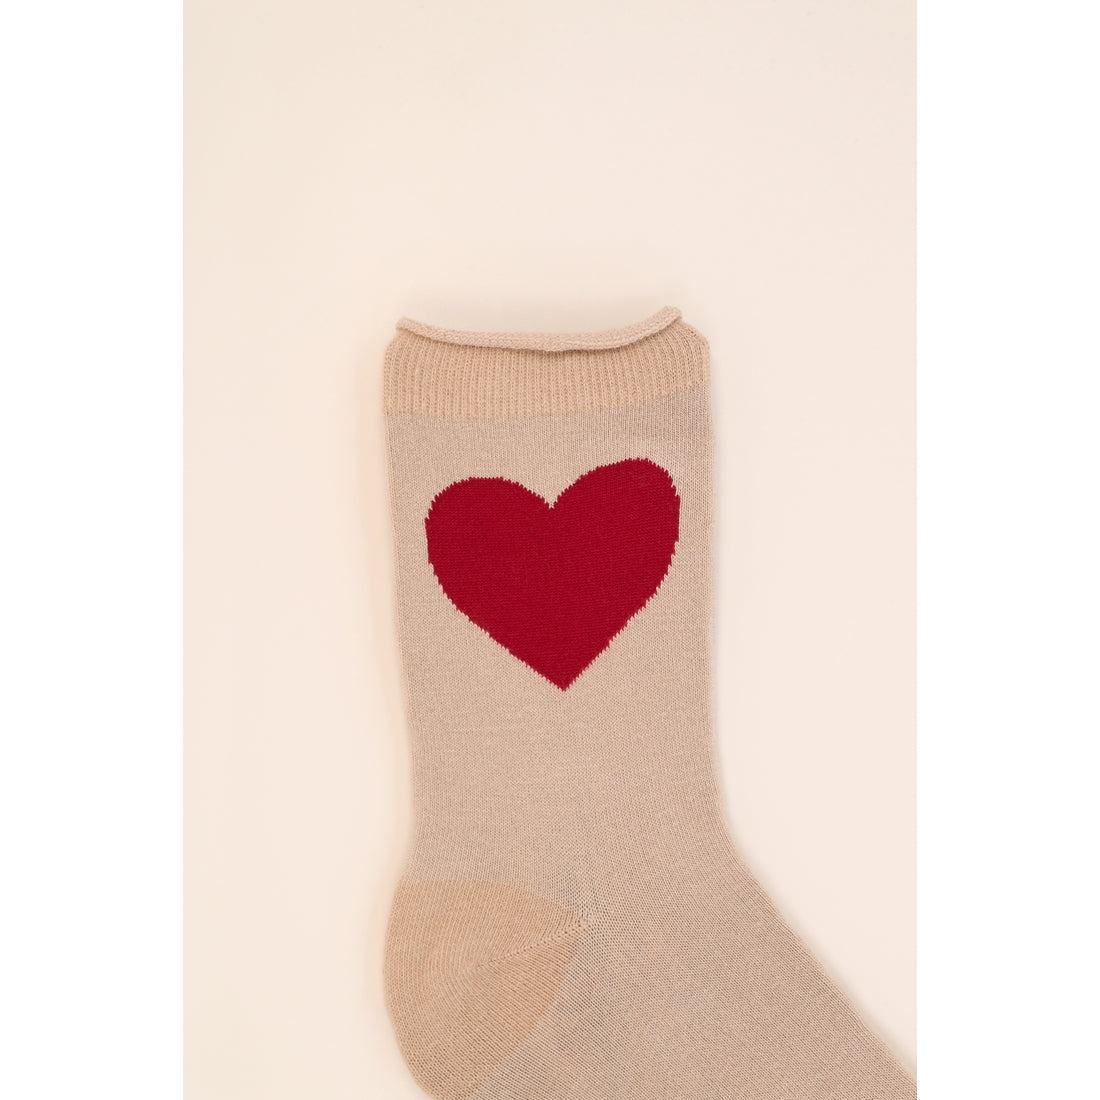 You Have My Heart Ankle Socks - Vanilla